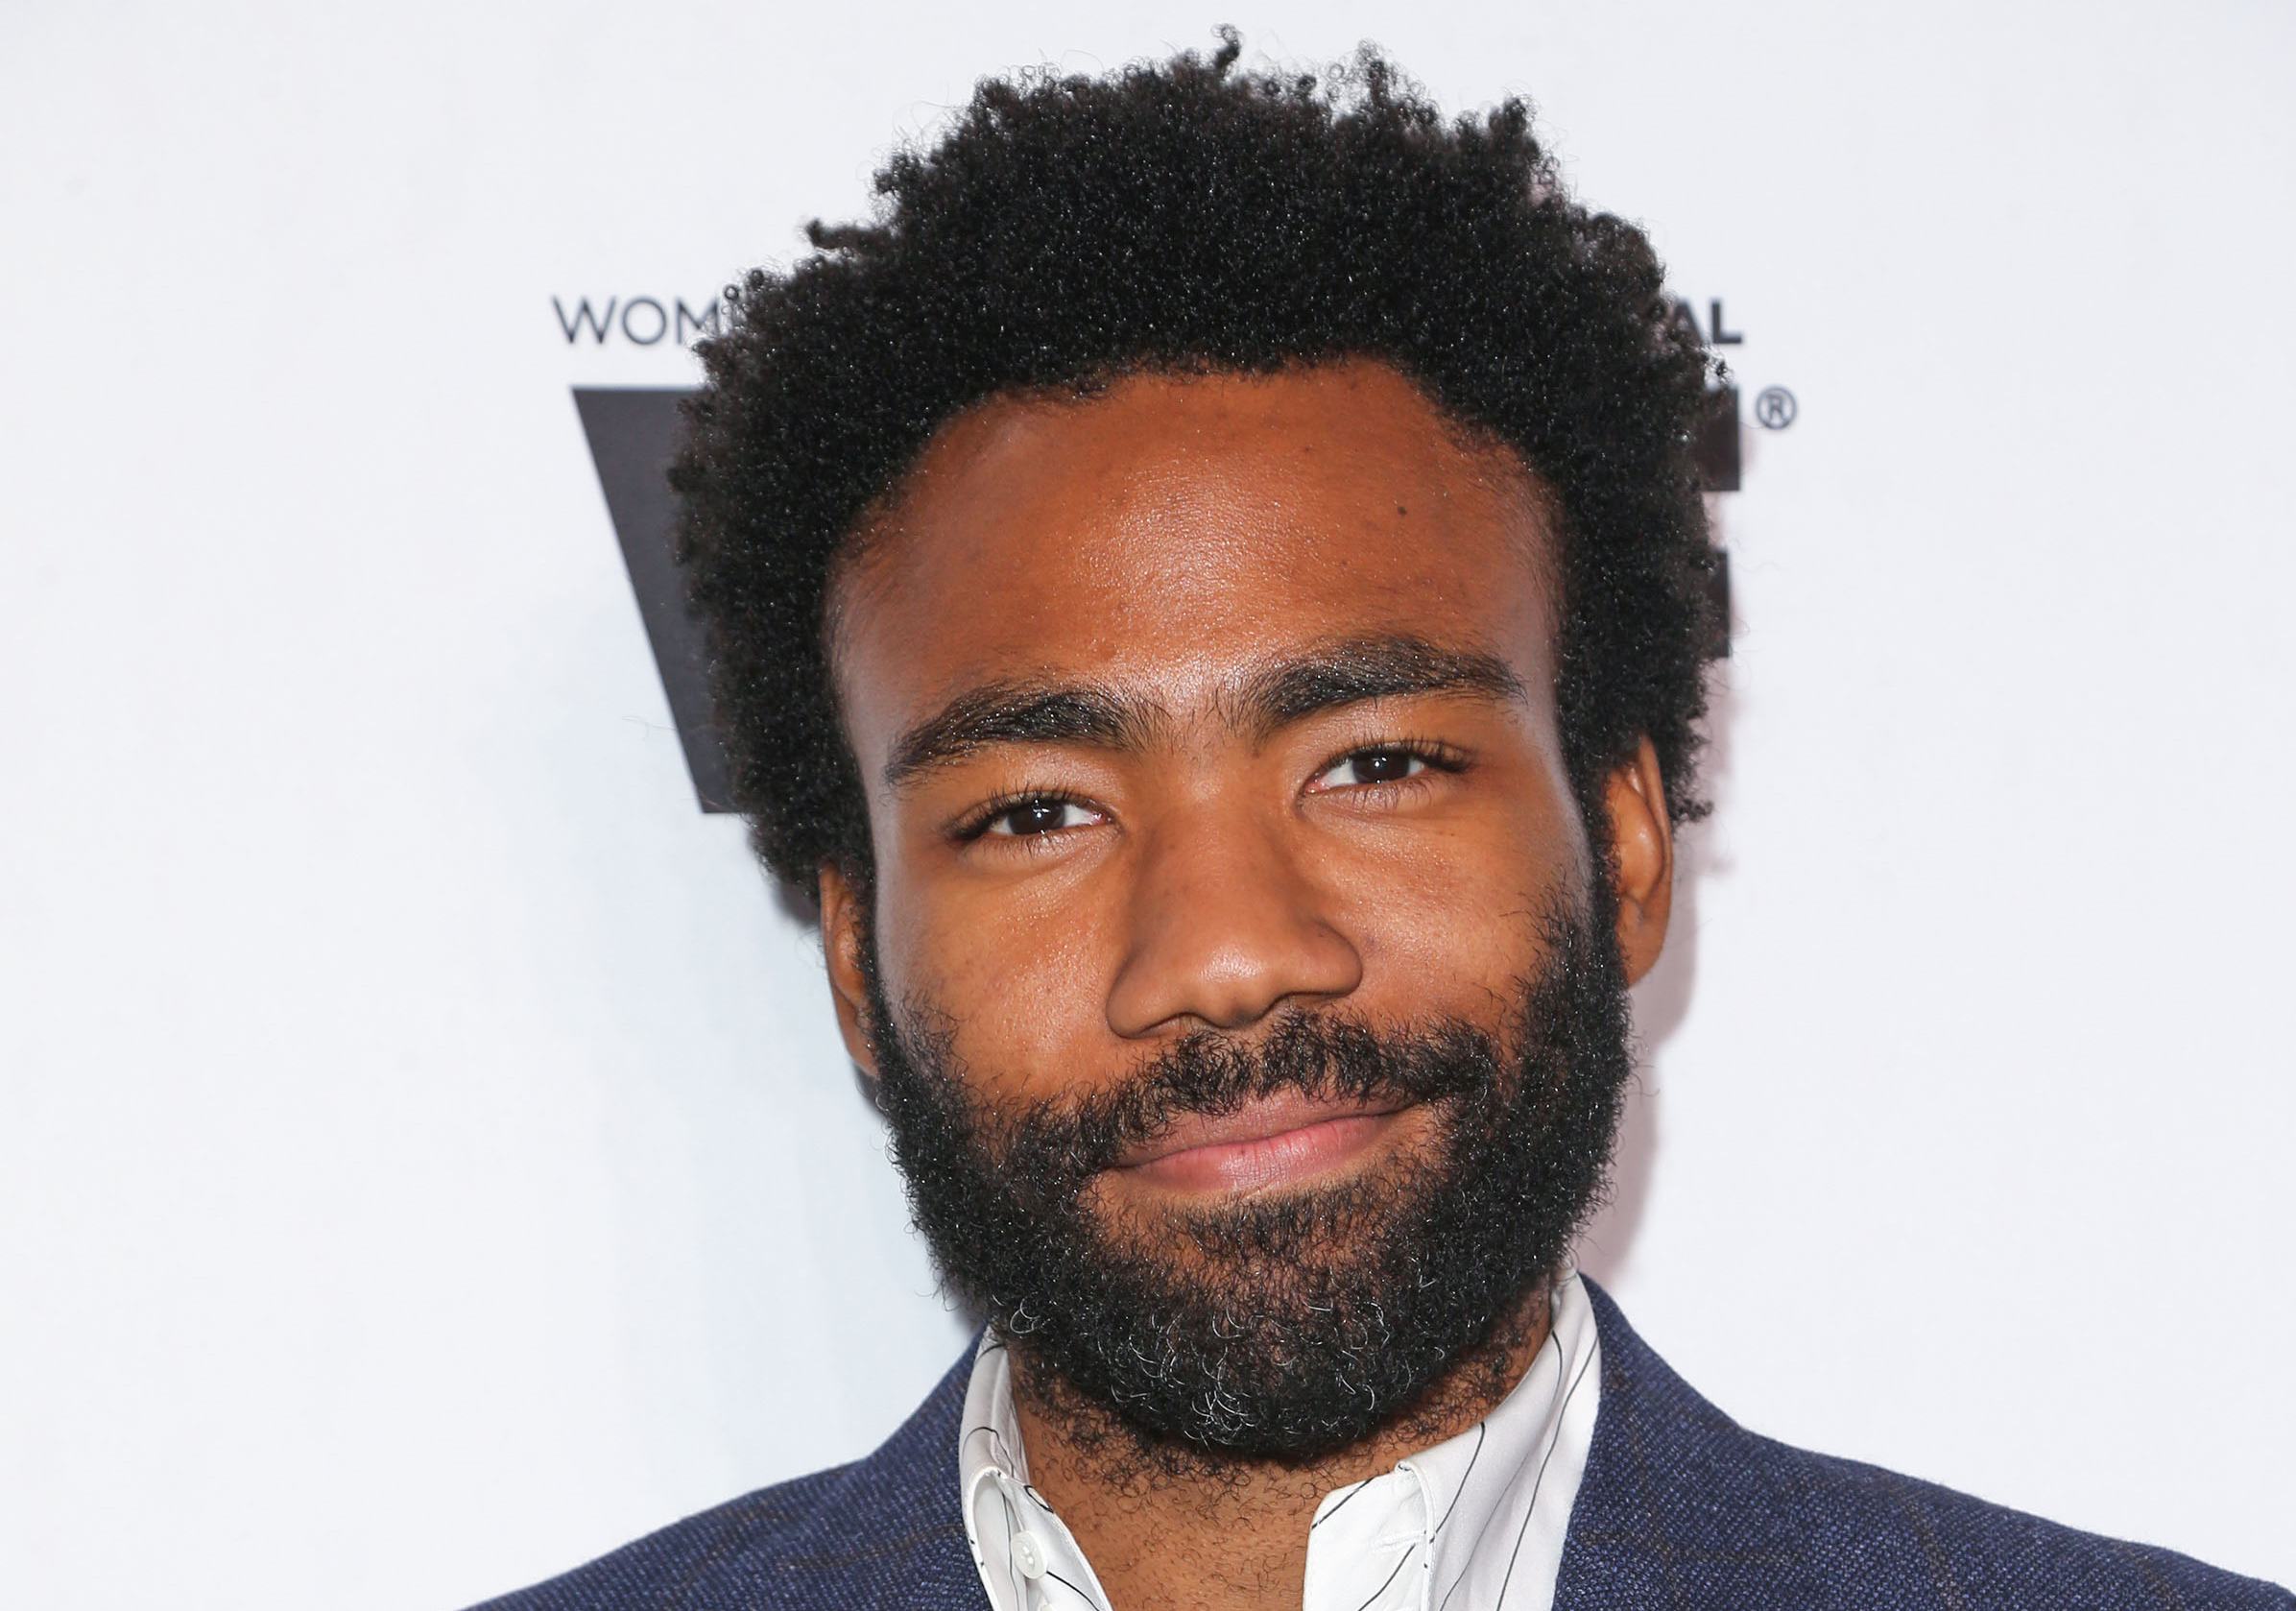 09/16/2016 - Donald Glover - Variety and Women in Film Host Pre-68th Annual Primetime Emmy Awards Celebration - Arrivals - Gracias Madre, 8905 Melrose Avenue - West Hollywood, CA, USA - Keywords: Vertical, WIF, Annual Event, Emmys, Social Event, Party, People, Person, Television Show, Photography, Portrait, Arts Culture and Entertainment, Arriving, Attending, Celebrity, Celebrities, 2016 Primetime Emmy Awards, 68th Primetime Emmy Awards, Media, Digital, Film Industry, Los Angeles, California Orientation: Portrait Face Count: 1 - False - Photo Credit: PRPhotos.com - Contact (1-866-551-7827) - Portrait Face Count: 1